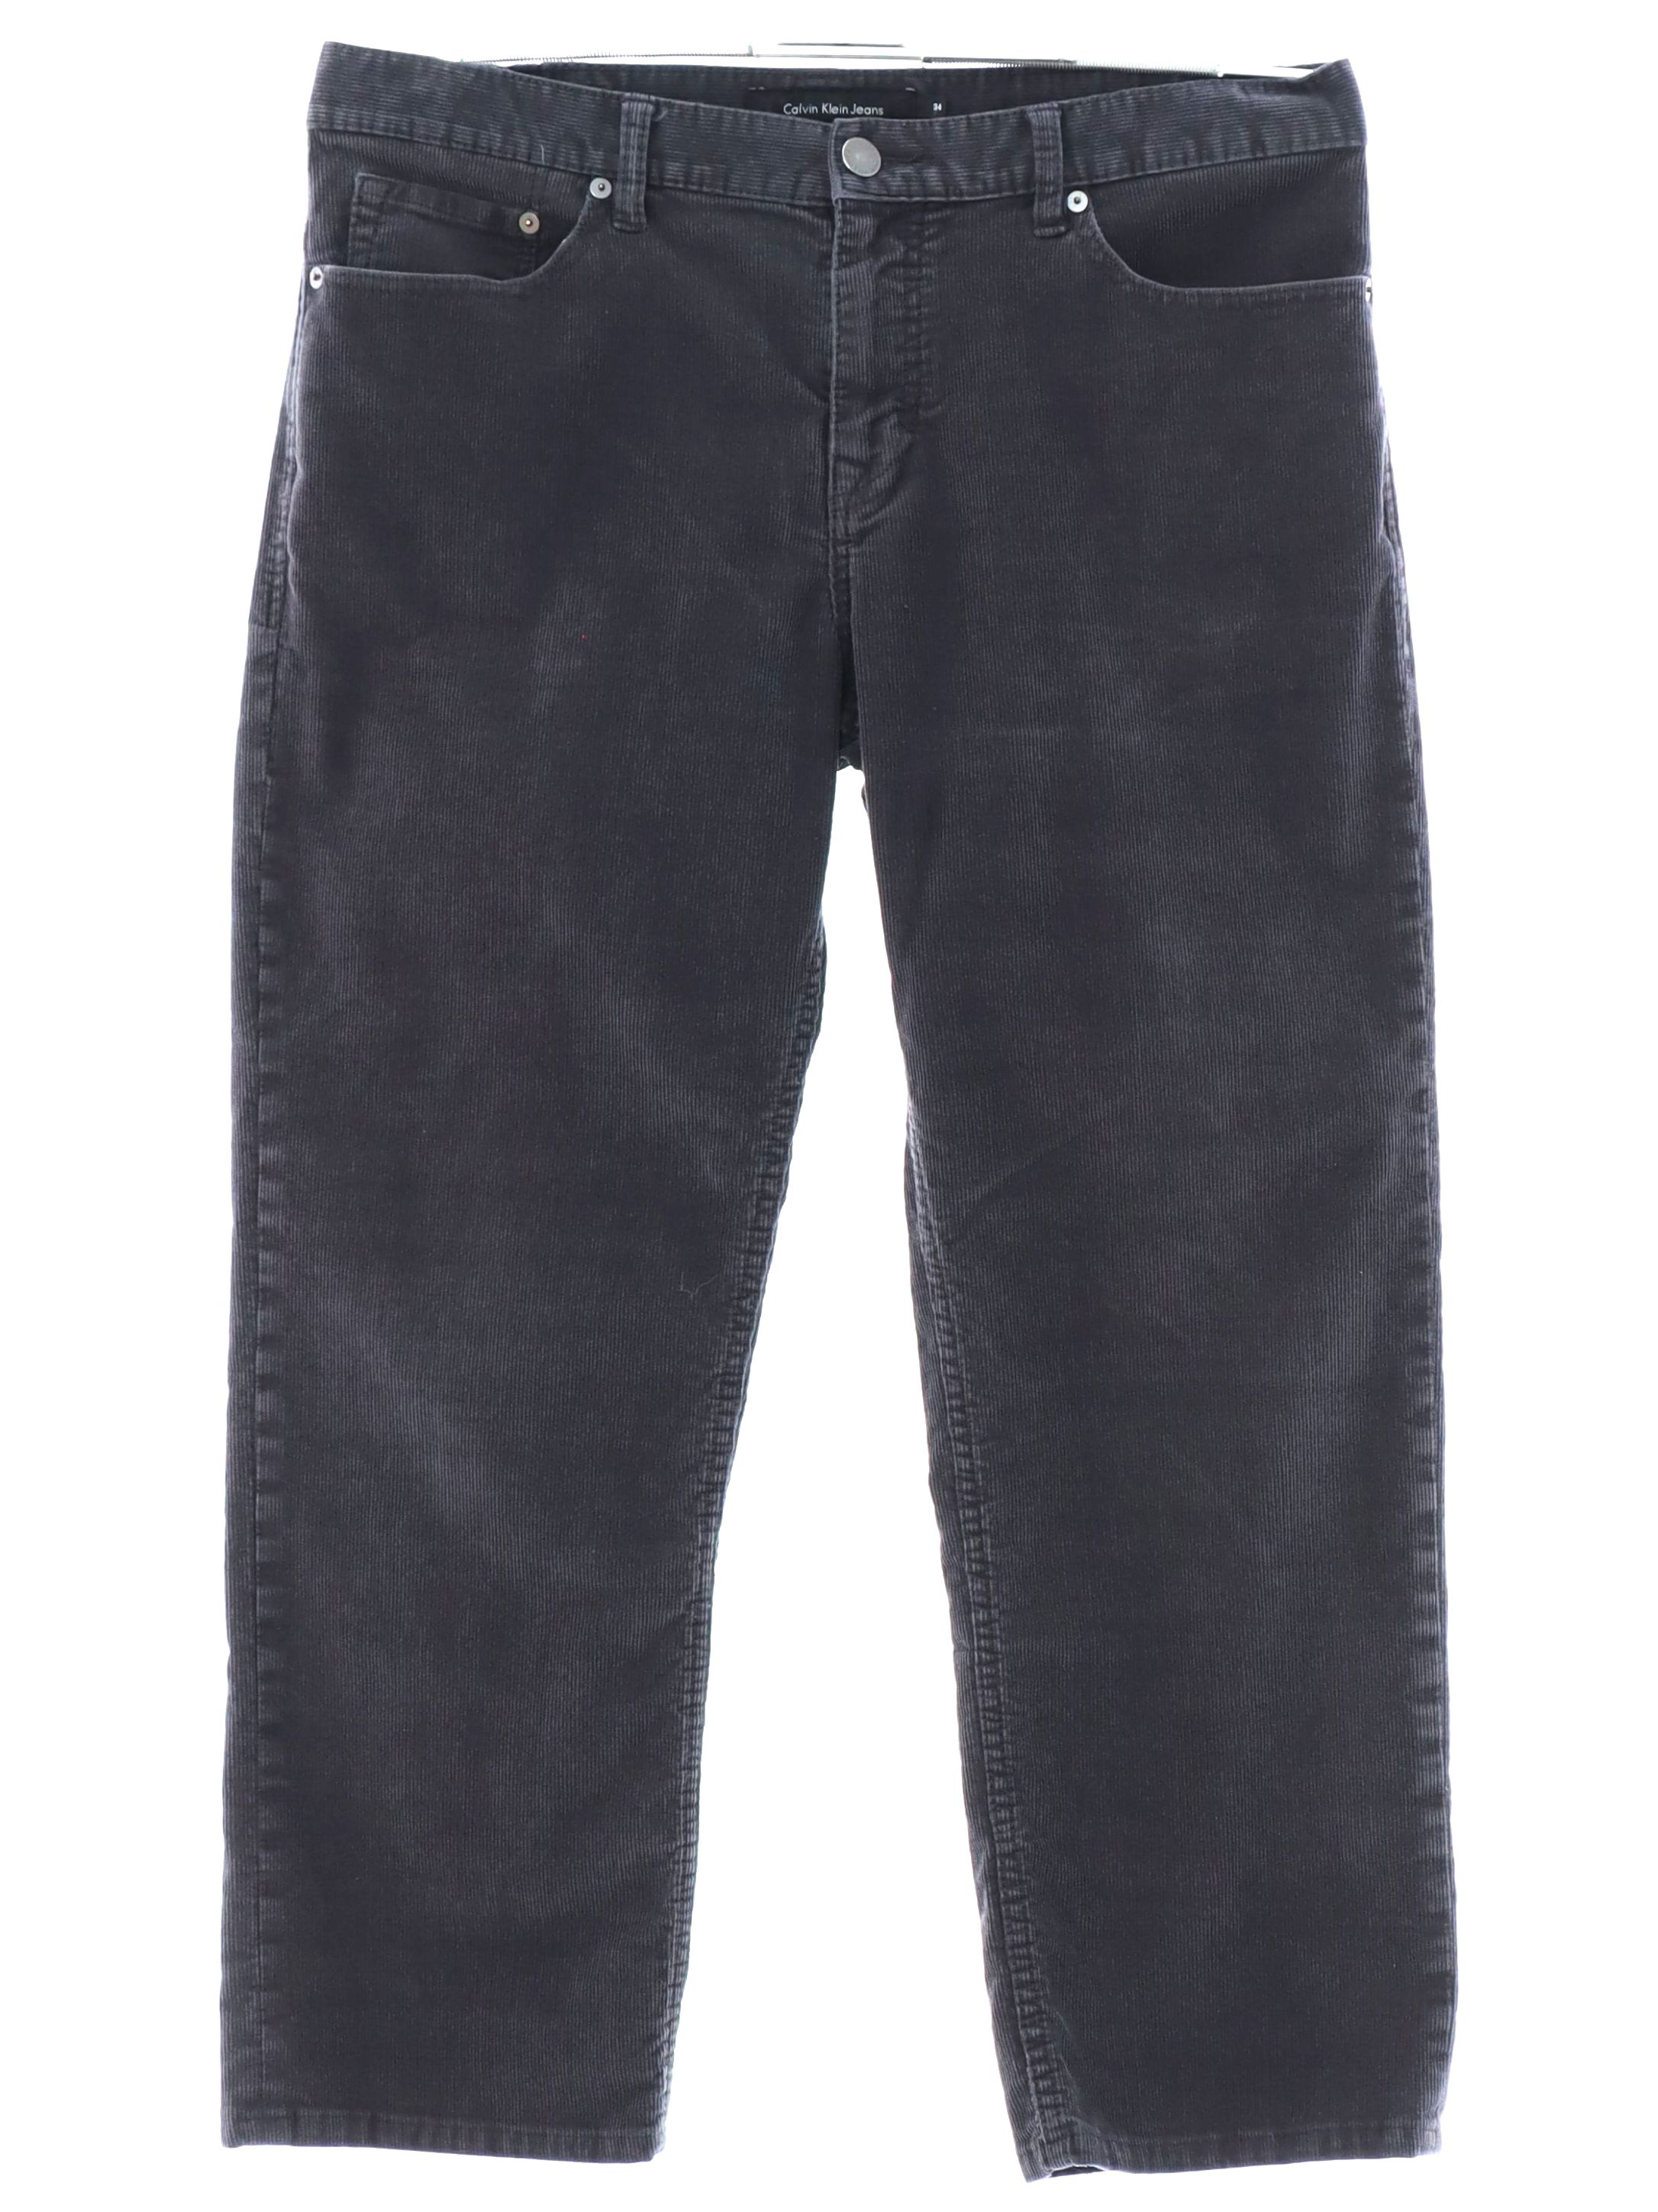 Pants: 90s -Calvin Klein Jeans- Mens charcoal gray solid colored cotton ...